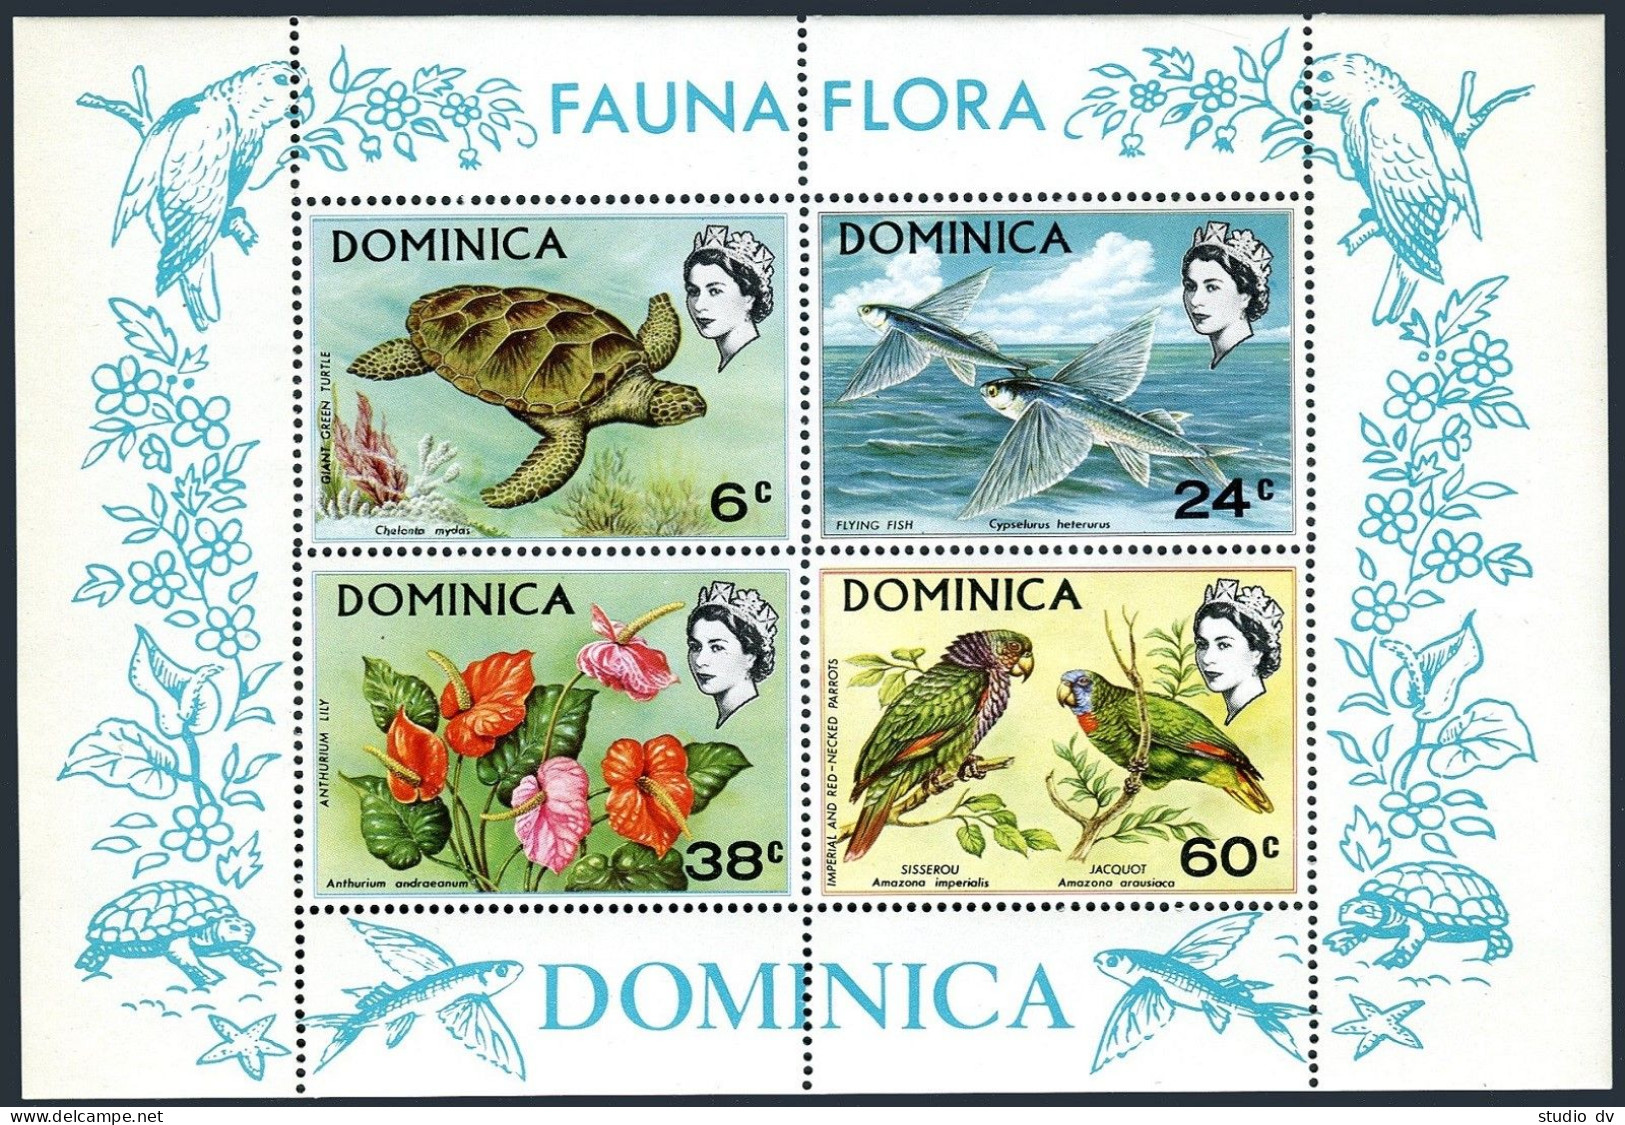 Dominica 300a Sheet,MNH. Mi Bl.2. Green Turtle,Fish,Anithurium Fly,Parrots. 1970 - Dominica (1978-...)